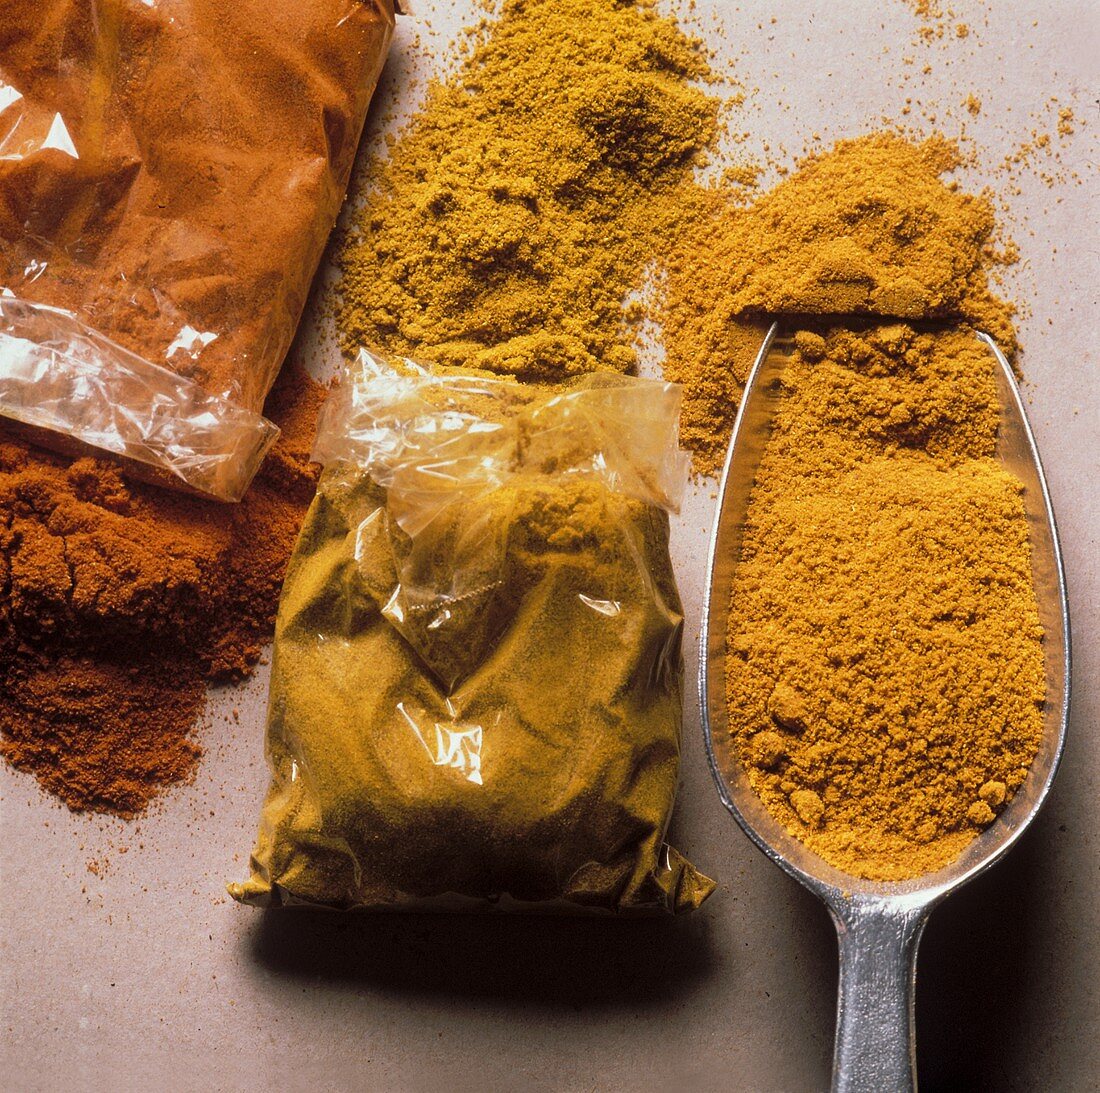 Curry powder in small bag and on a scoop